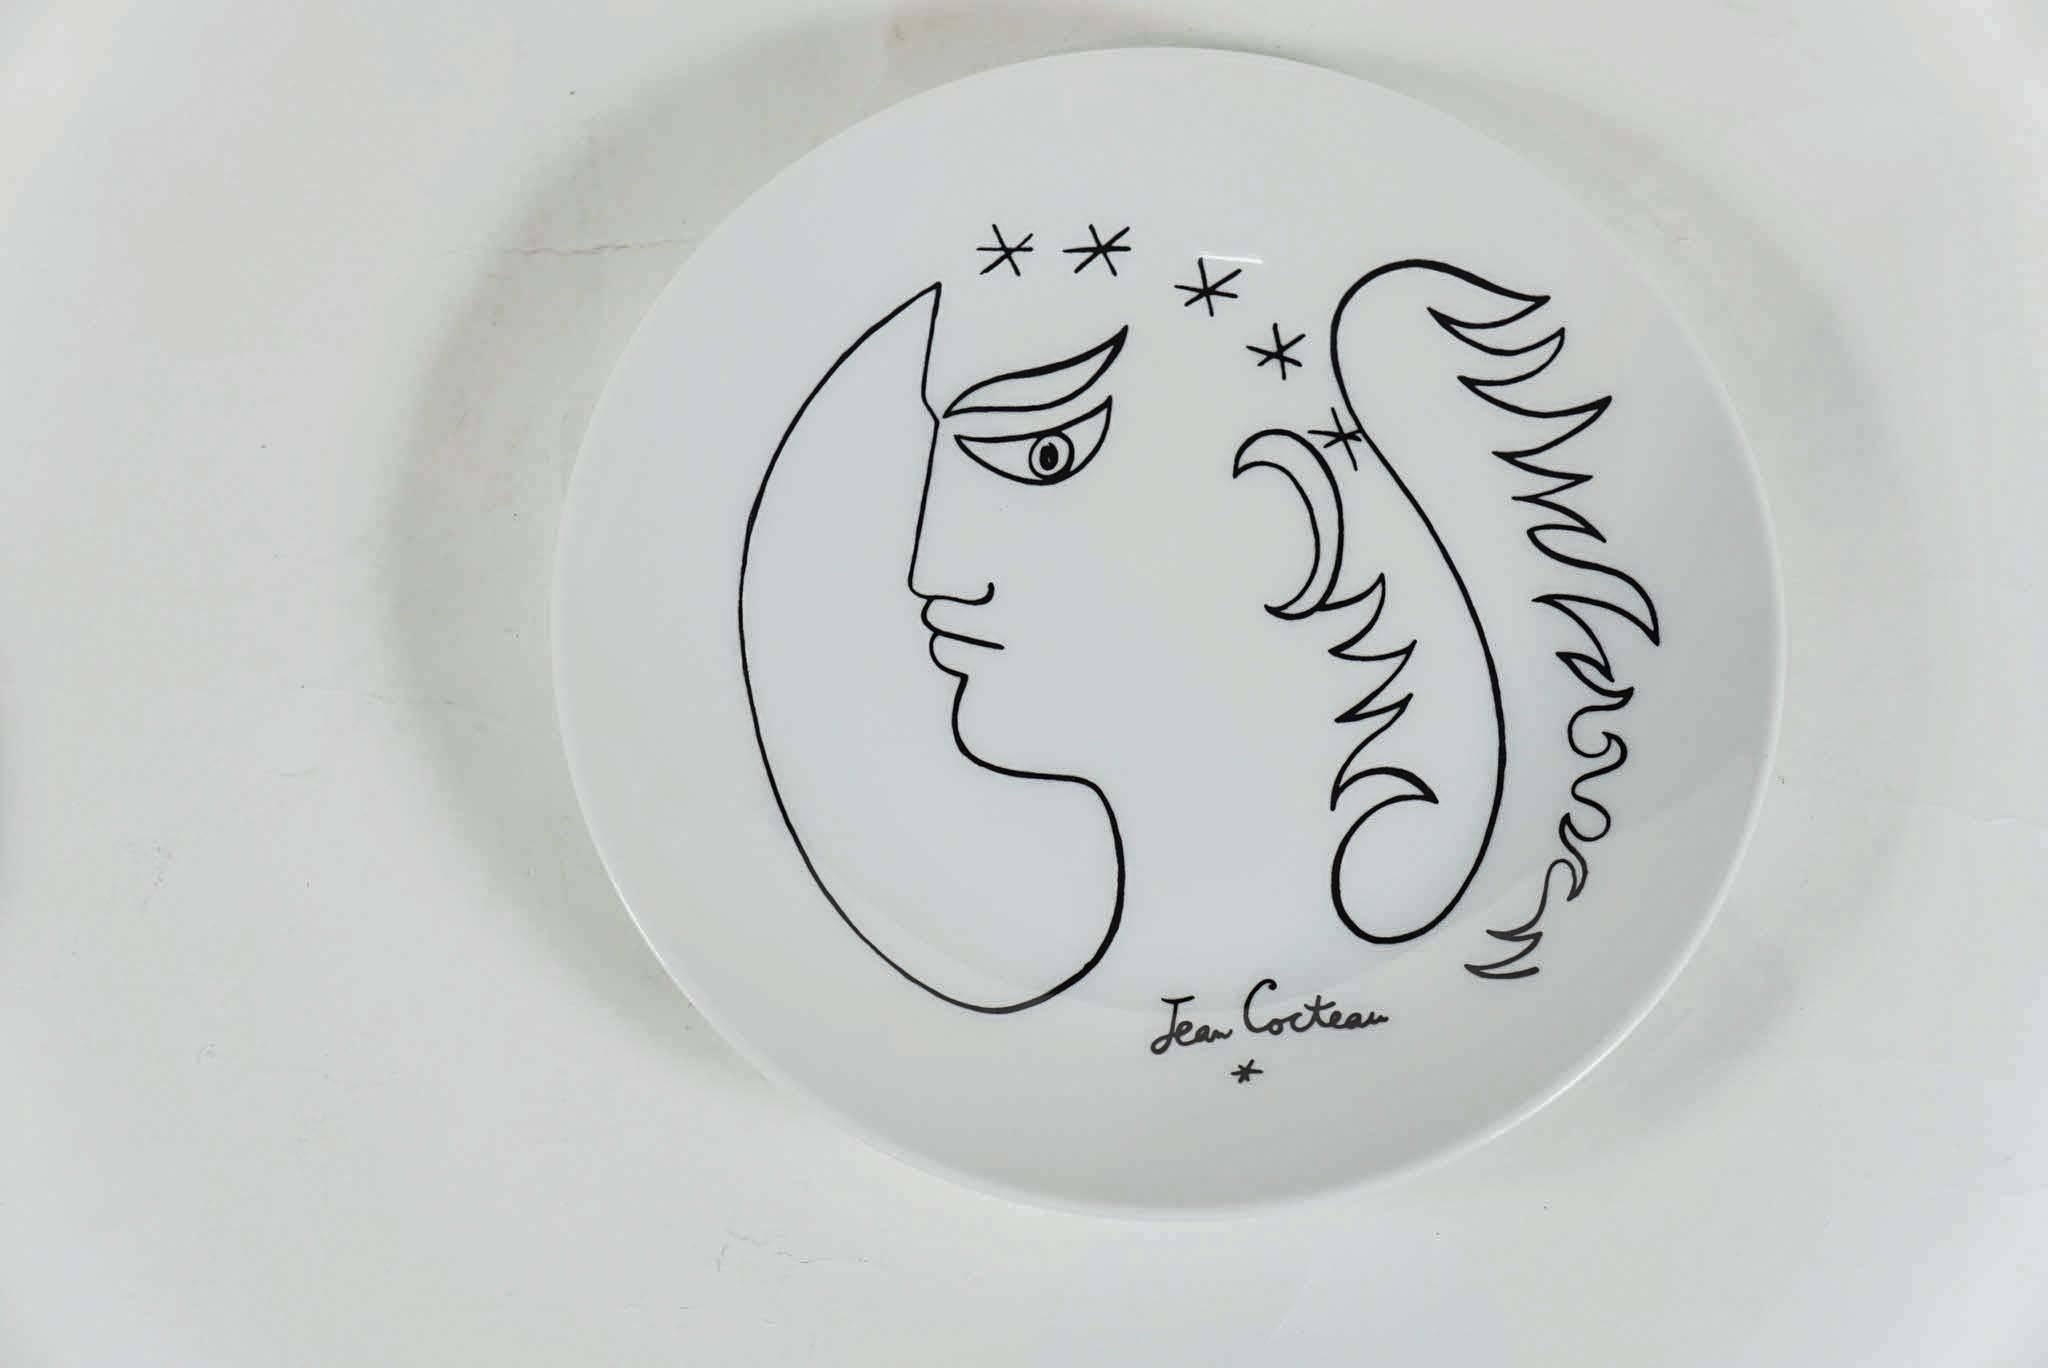 French Jean Cocteau Plates  by Promo Ceram and Picasso Plate by ECPLP